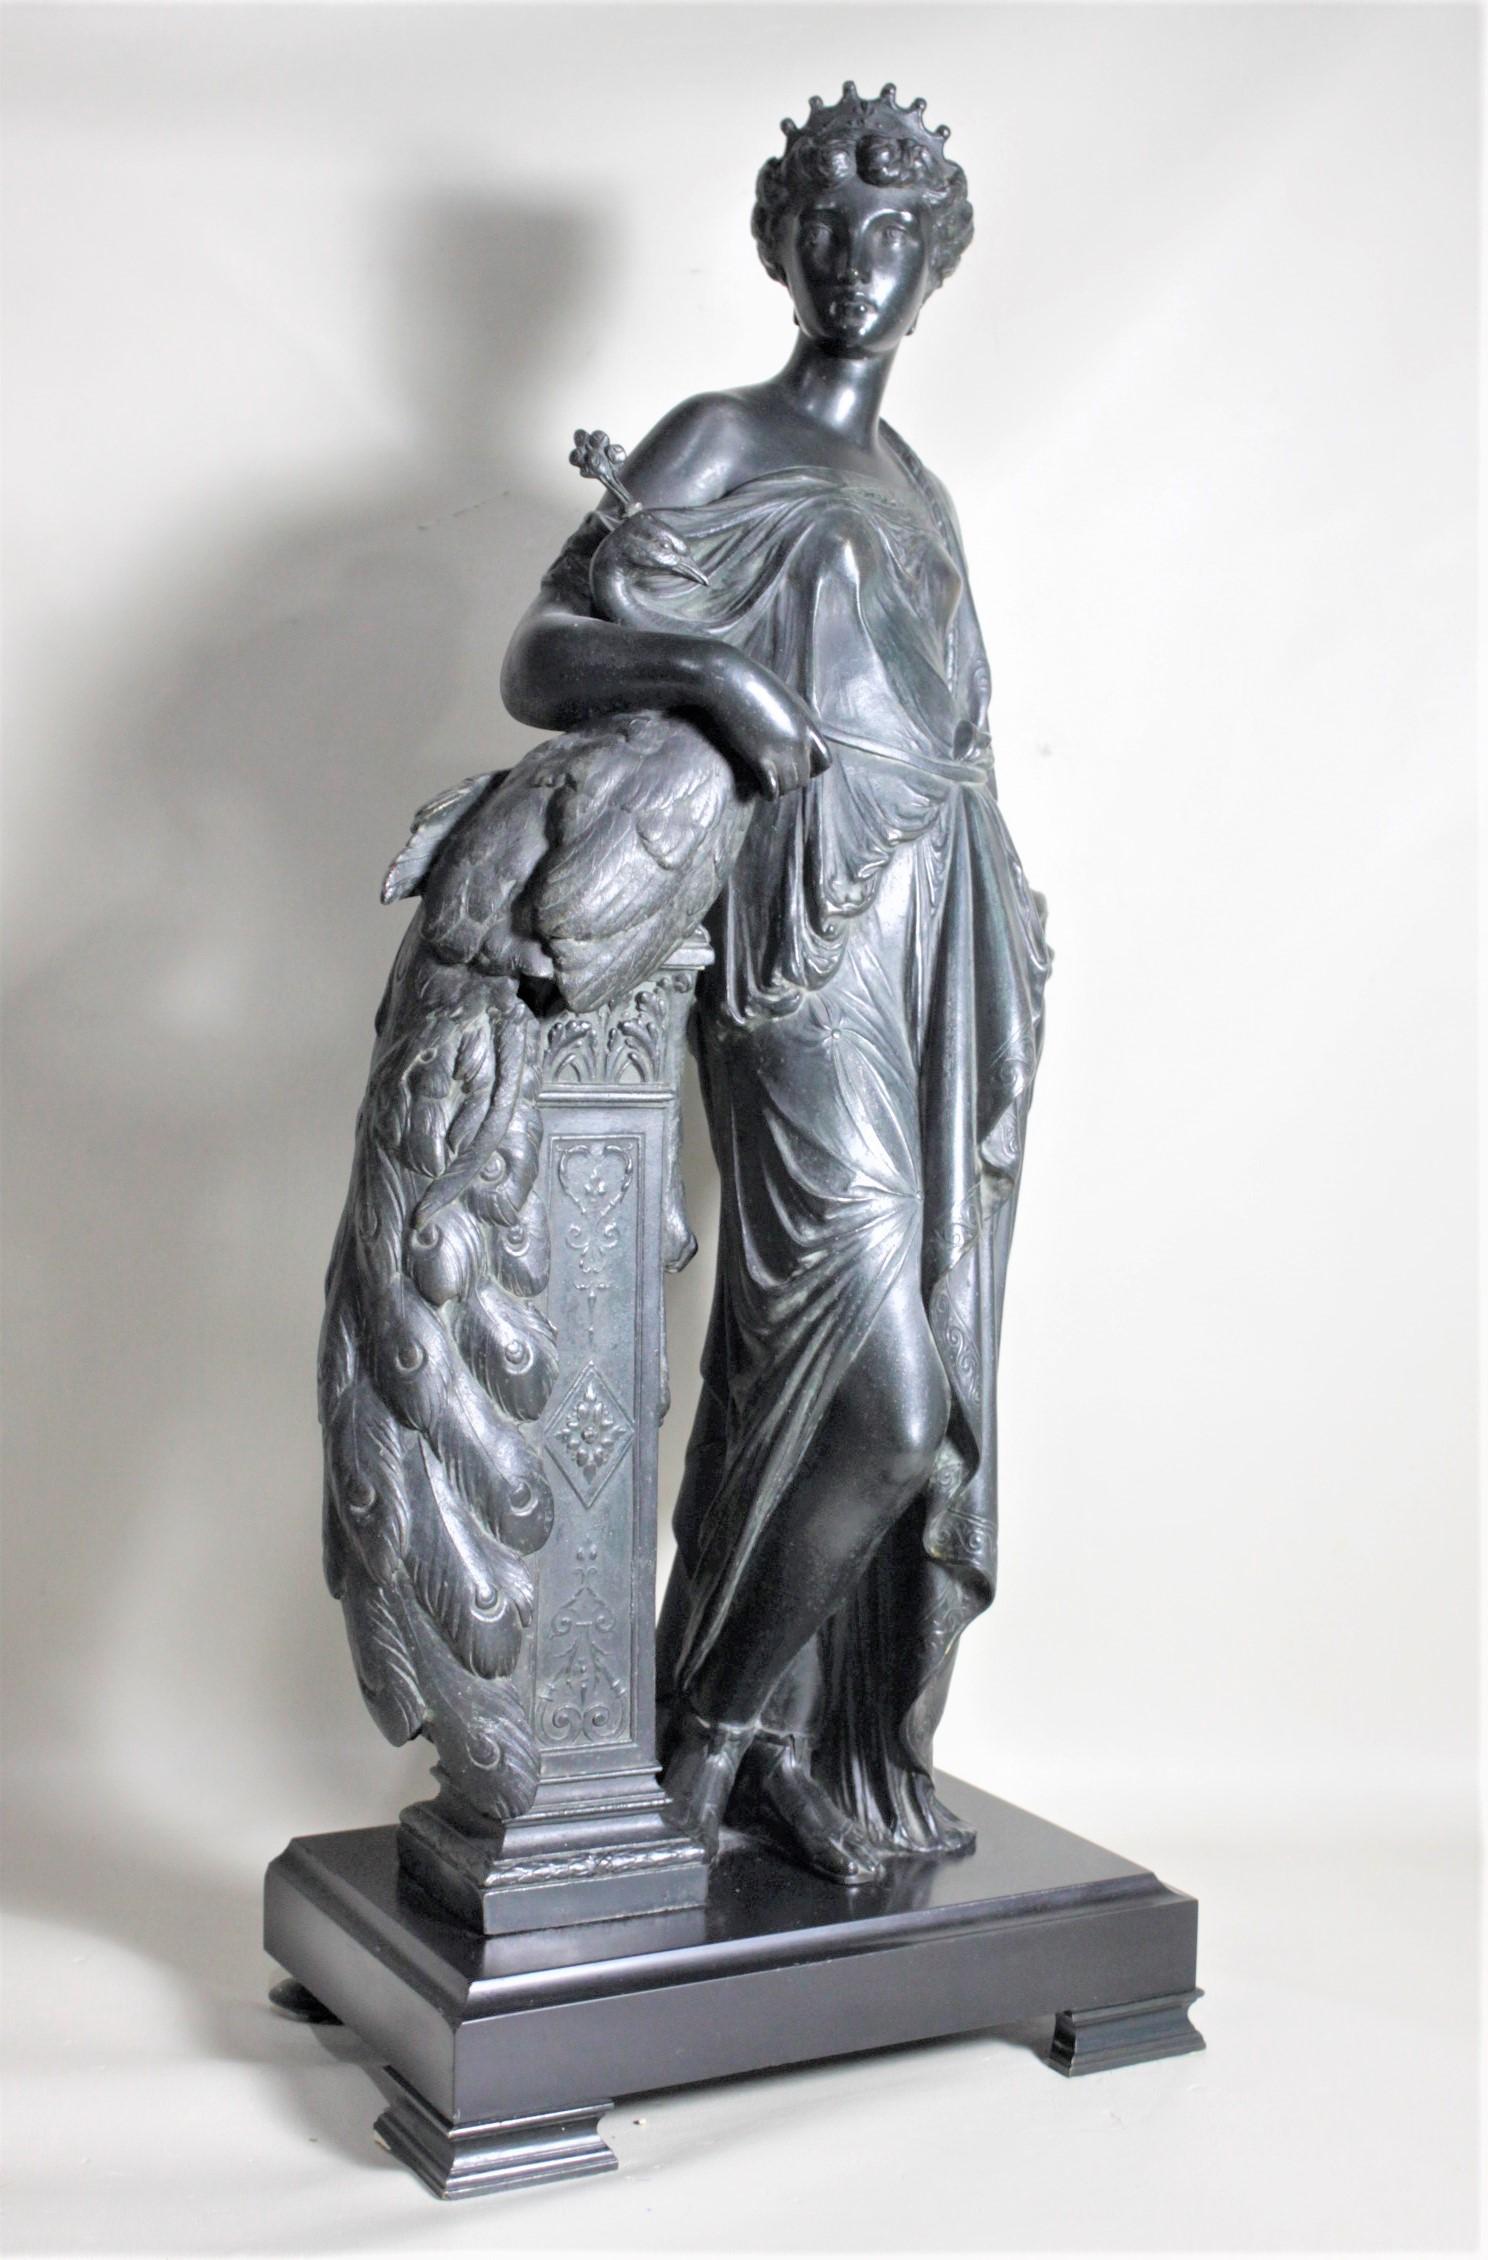 This large and substantial antique cast spelter sculpture is unsigned but presumed to have been made in France in circa 1880 in the neoclassical style. This very detailed cast sculpture depicts a robed neoclassical woman, possibly Hera the Greek